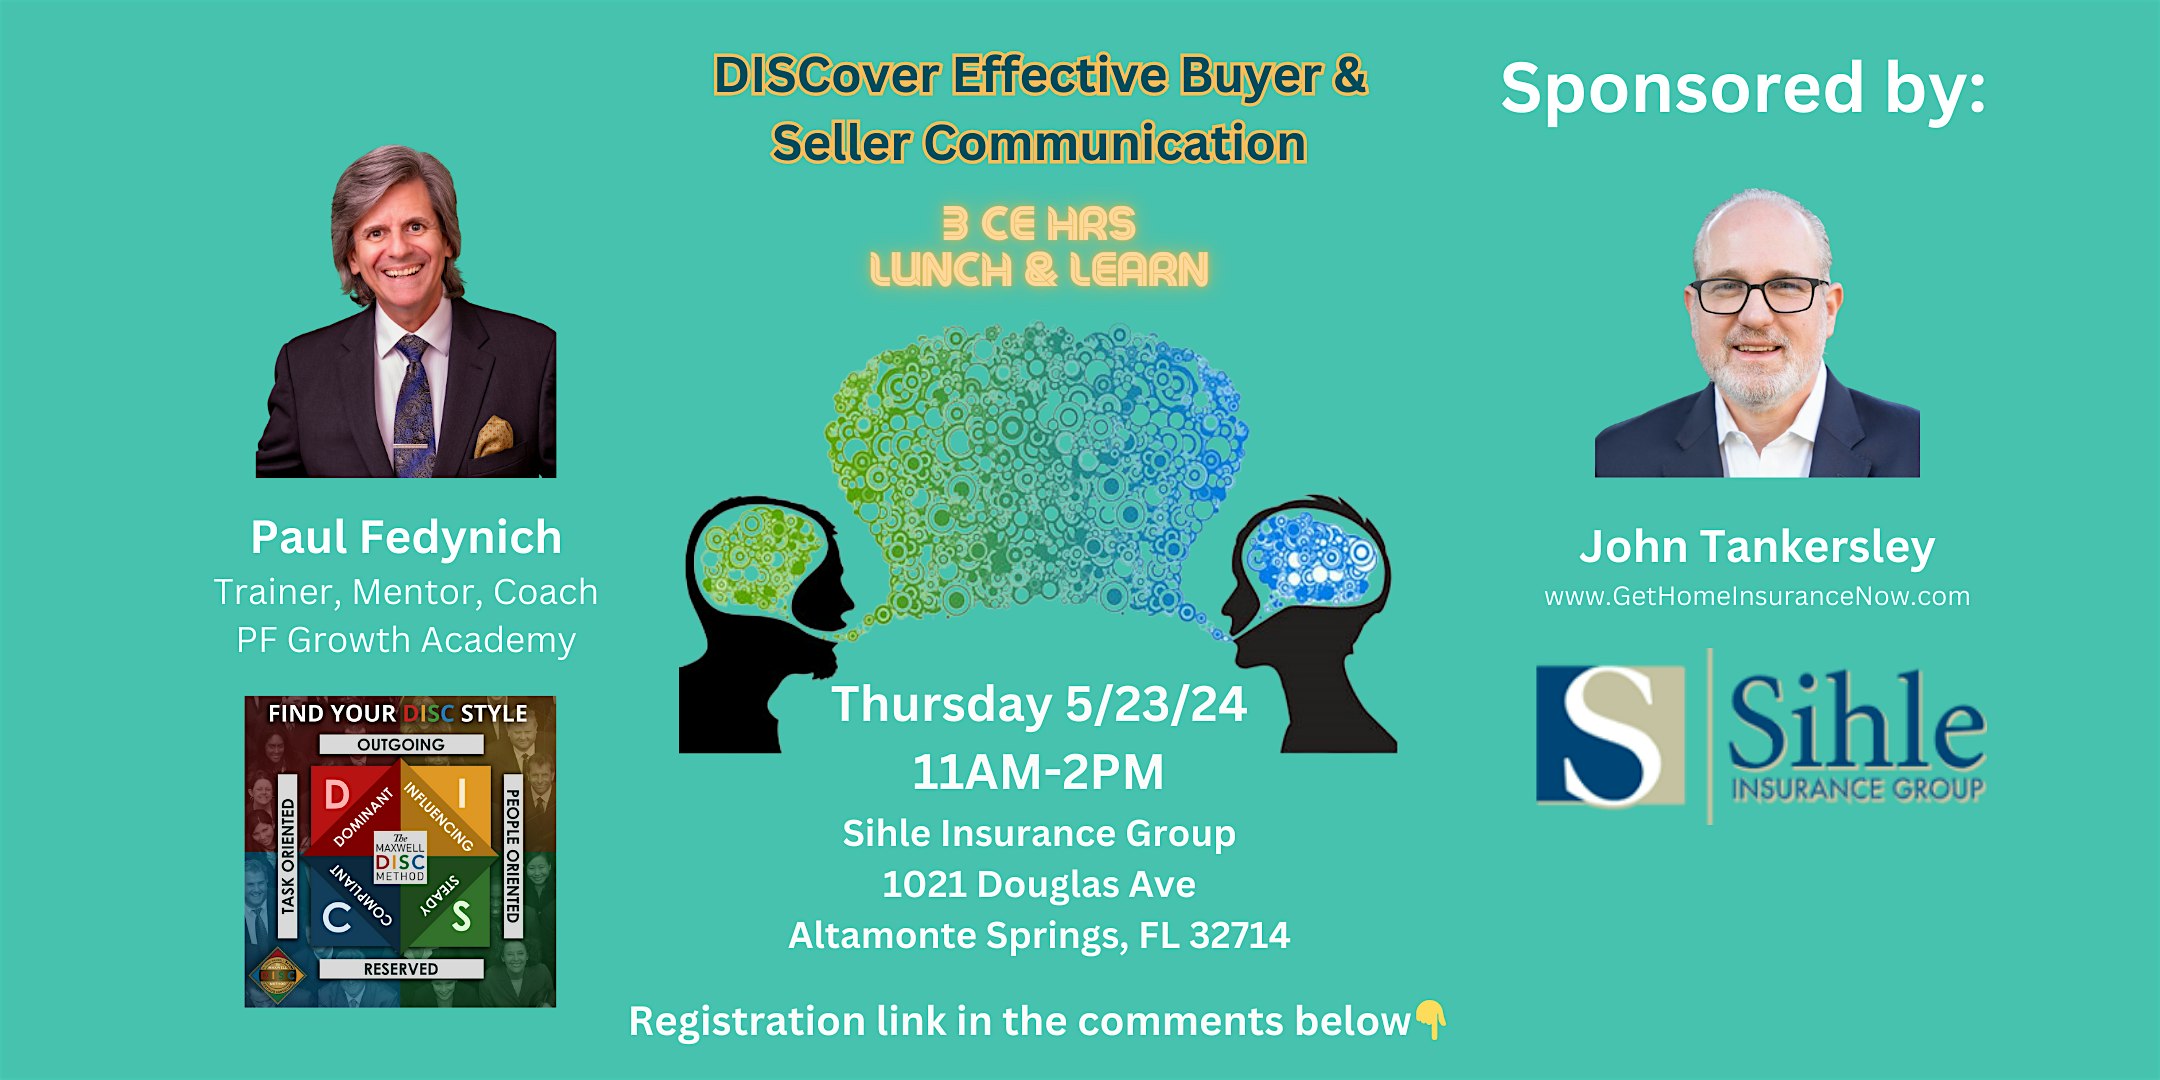 DISCover Effective Buyer & Seller Communication utilizing DISC Personality